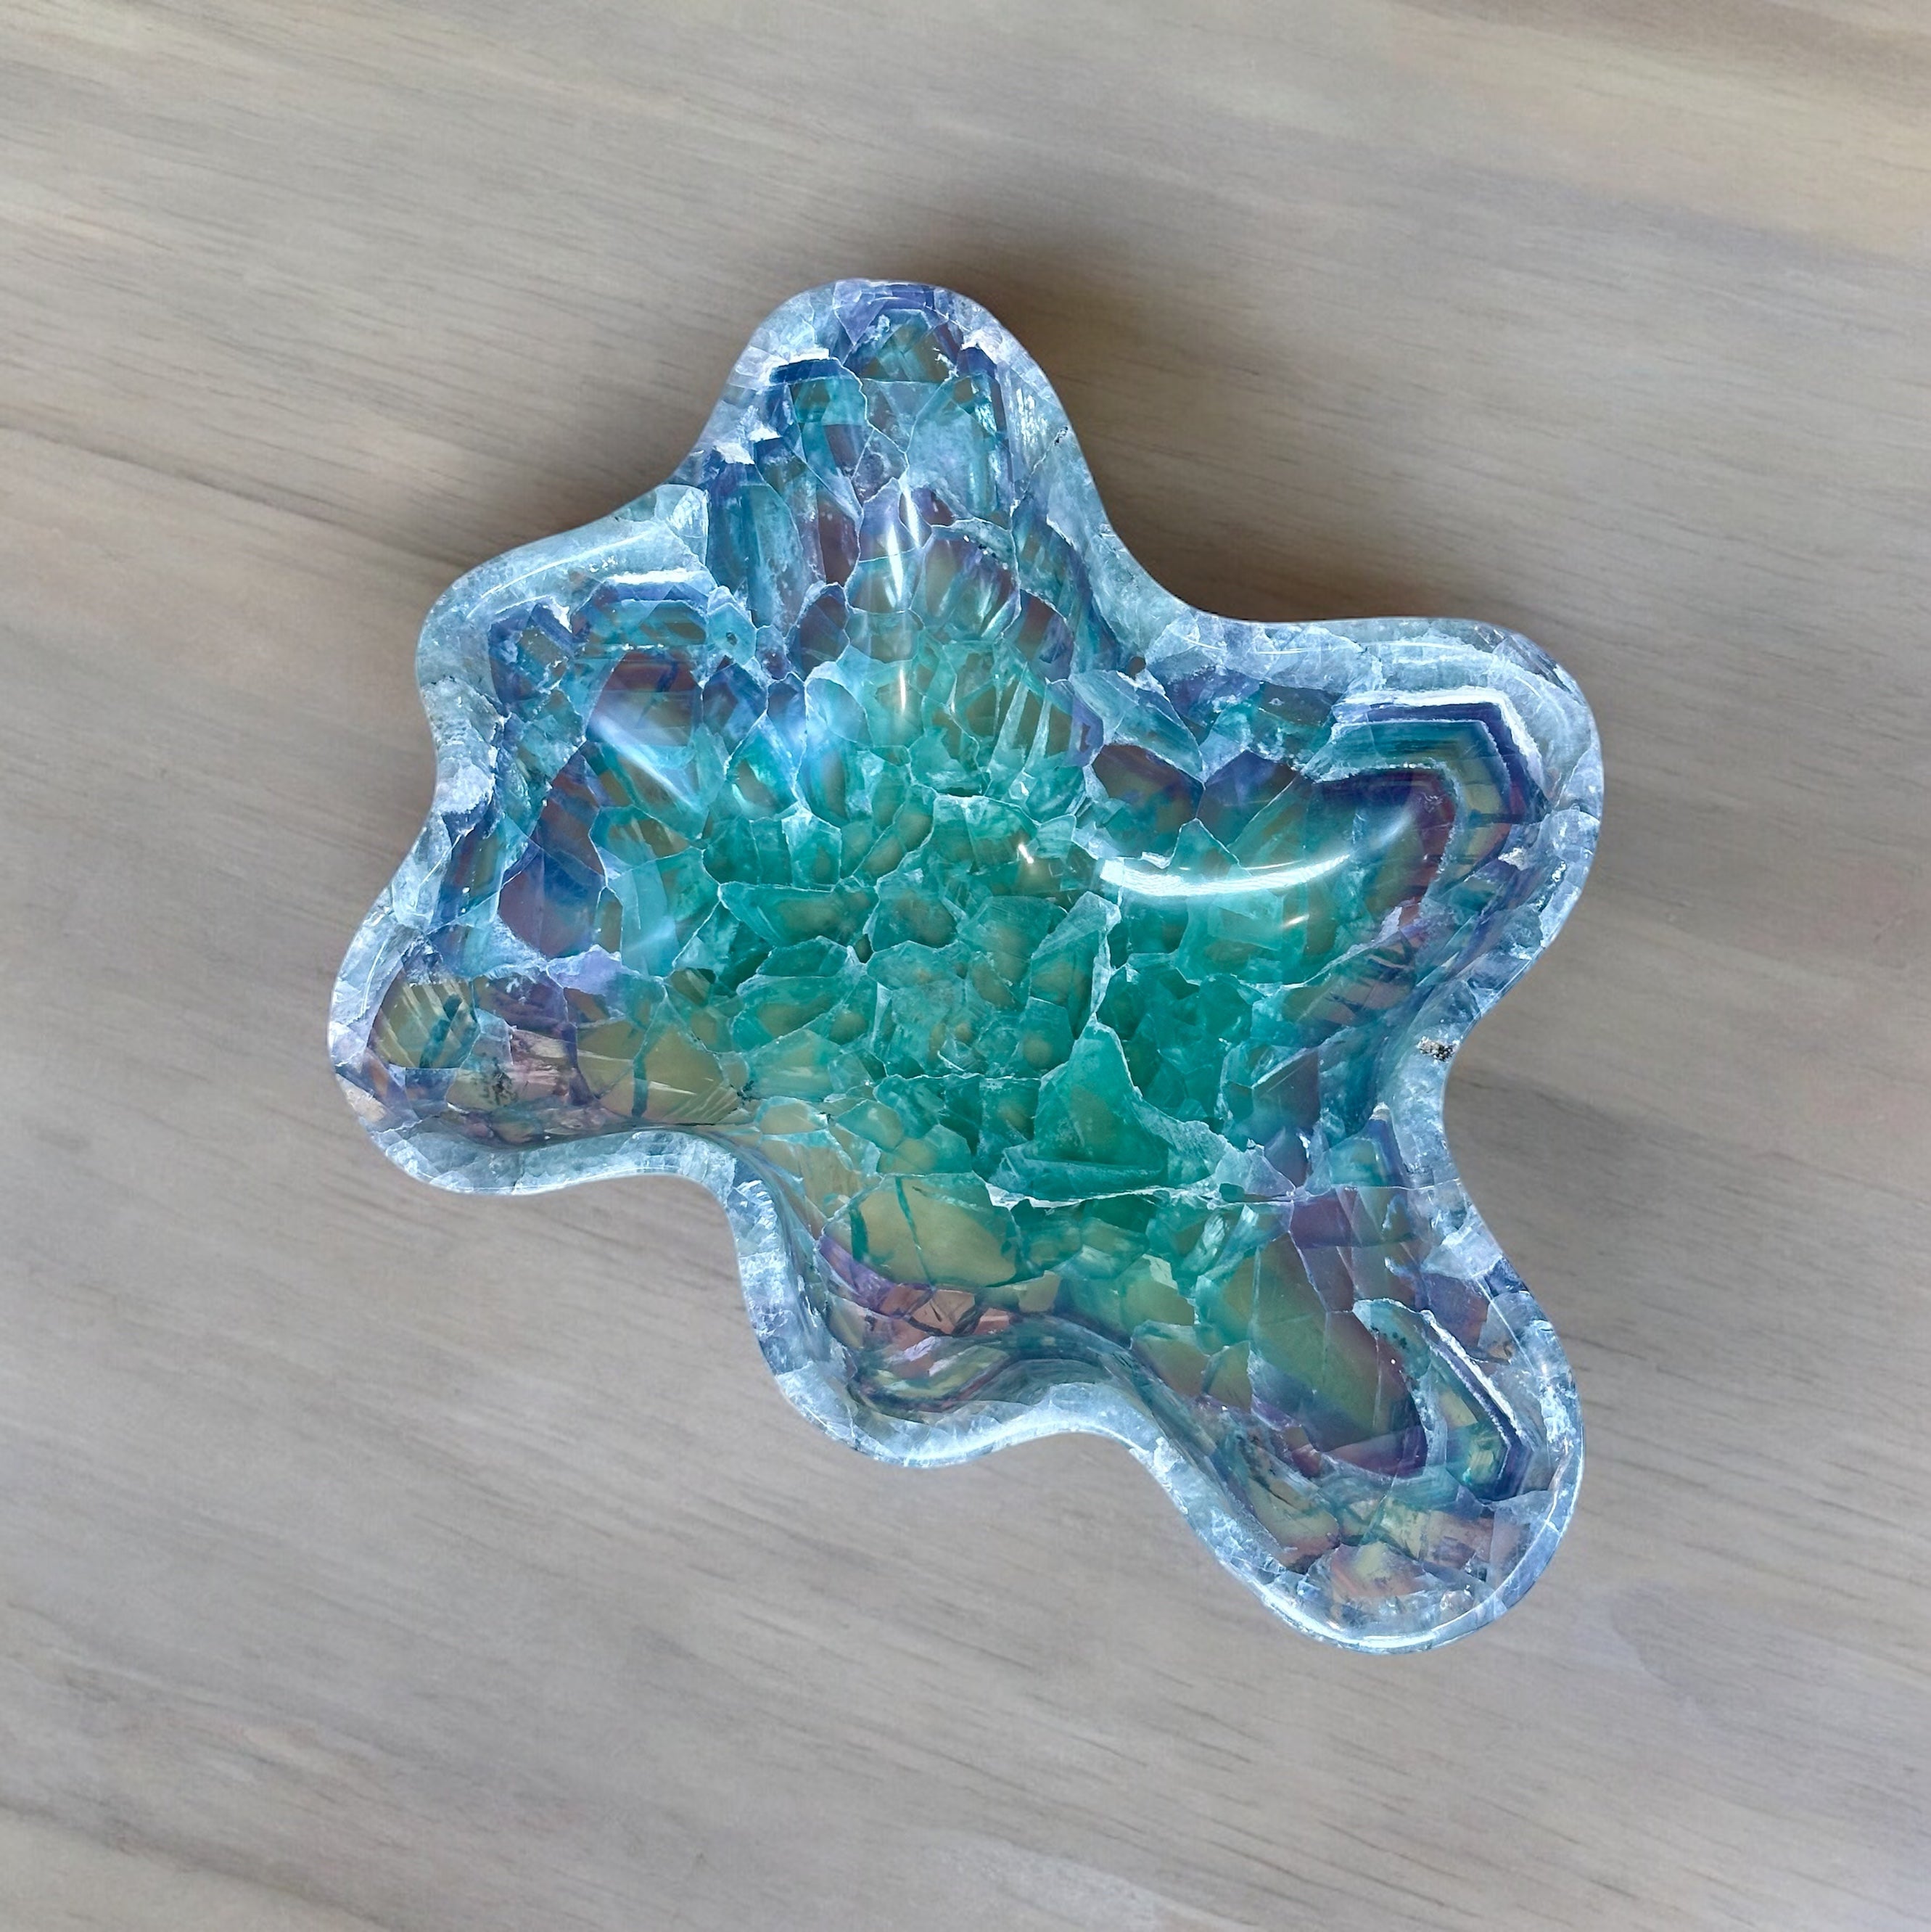 Handcrafted Fluorite Bowl - Grade A Fluorite - Fluorescent with visible Denderites